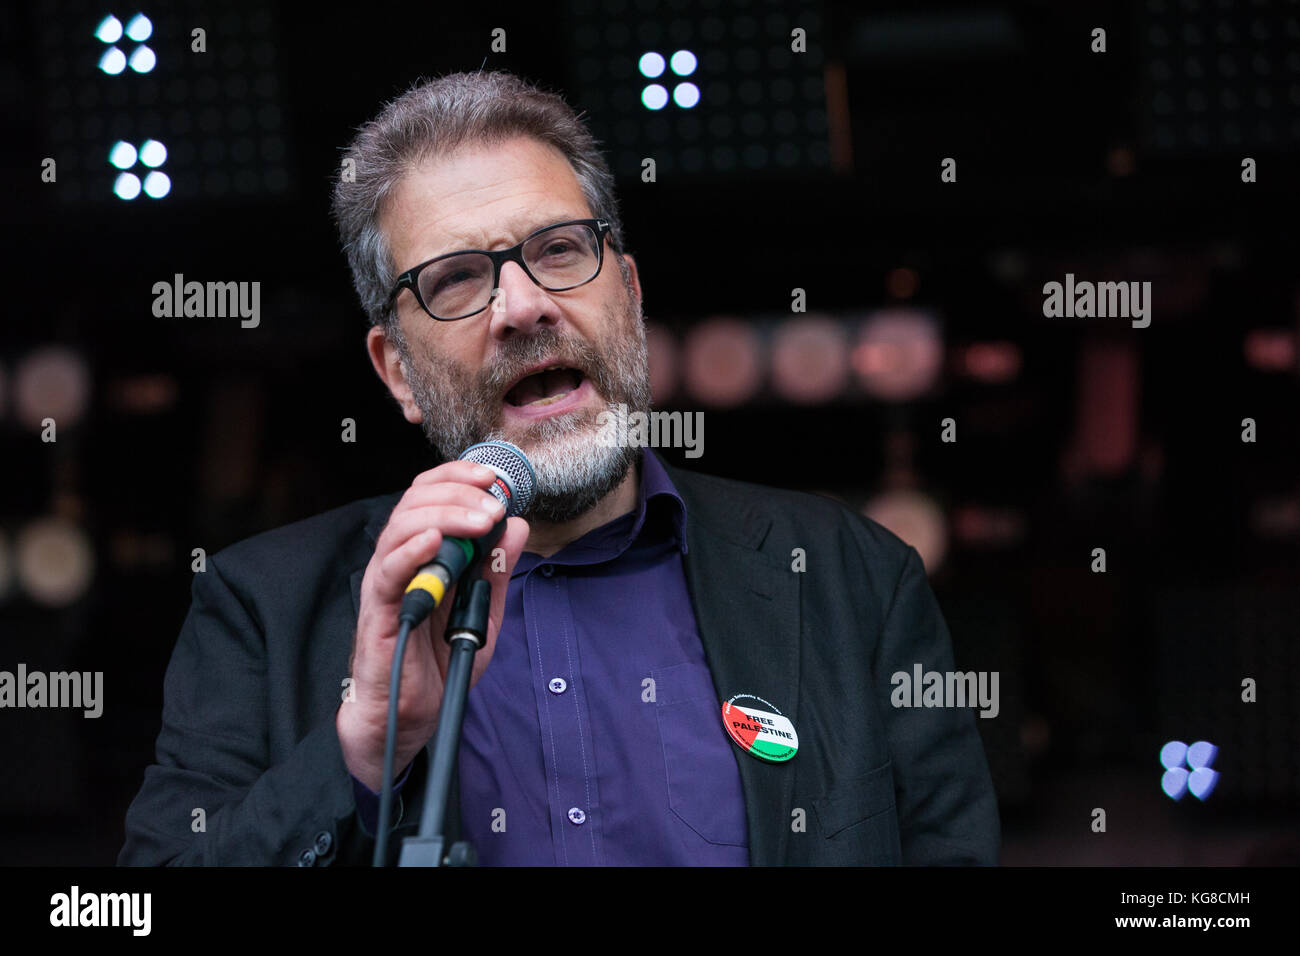 London, UK. 4th November, 2017. Ben Jamal, Director of Palestine Solidarity Campaign, addresses campaigners for Palestine who marched through London to demand justice and equal rights for Palestinians two days after the 100th anniversary of the Balfour Declaration on 2nd November 1917. Credit: Mark Kerrison/Alamy Live News Stock Photo